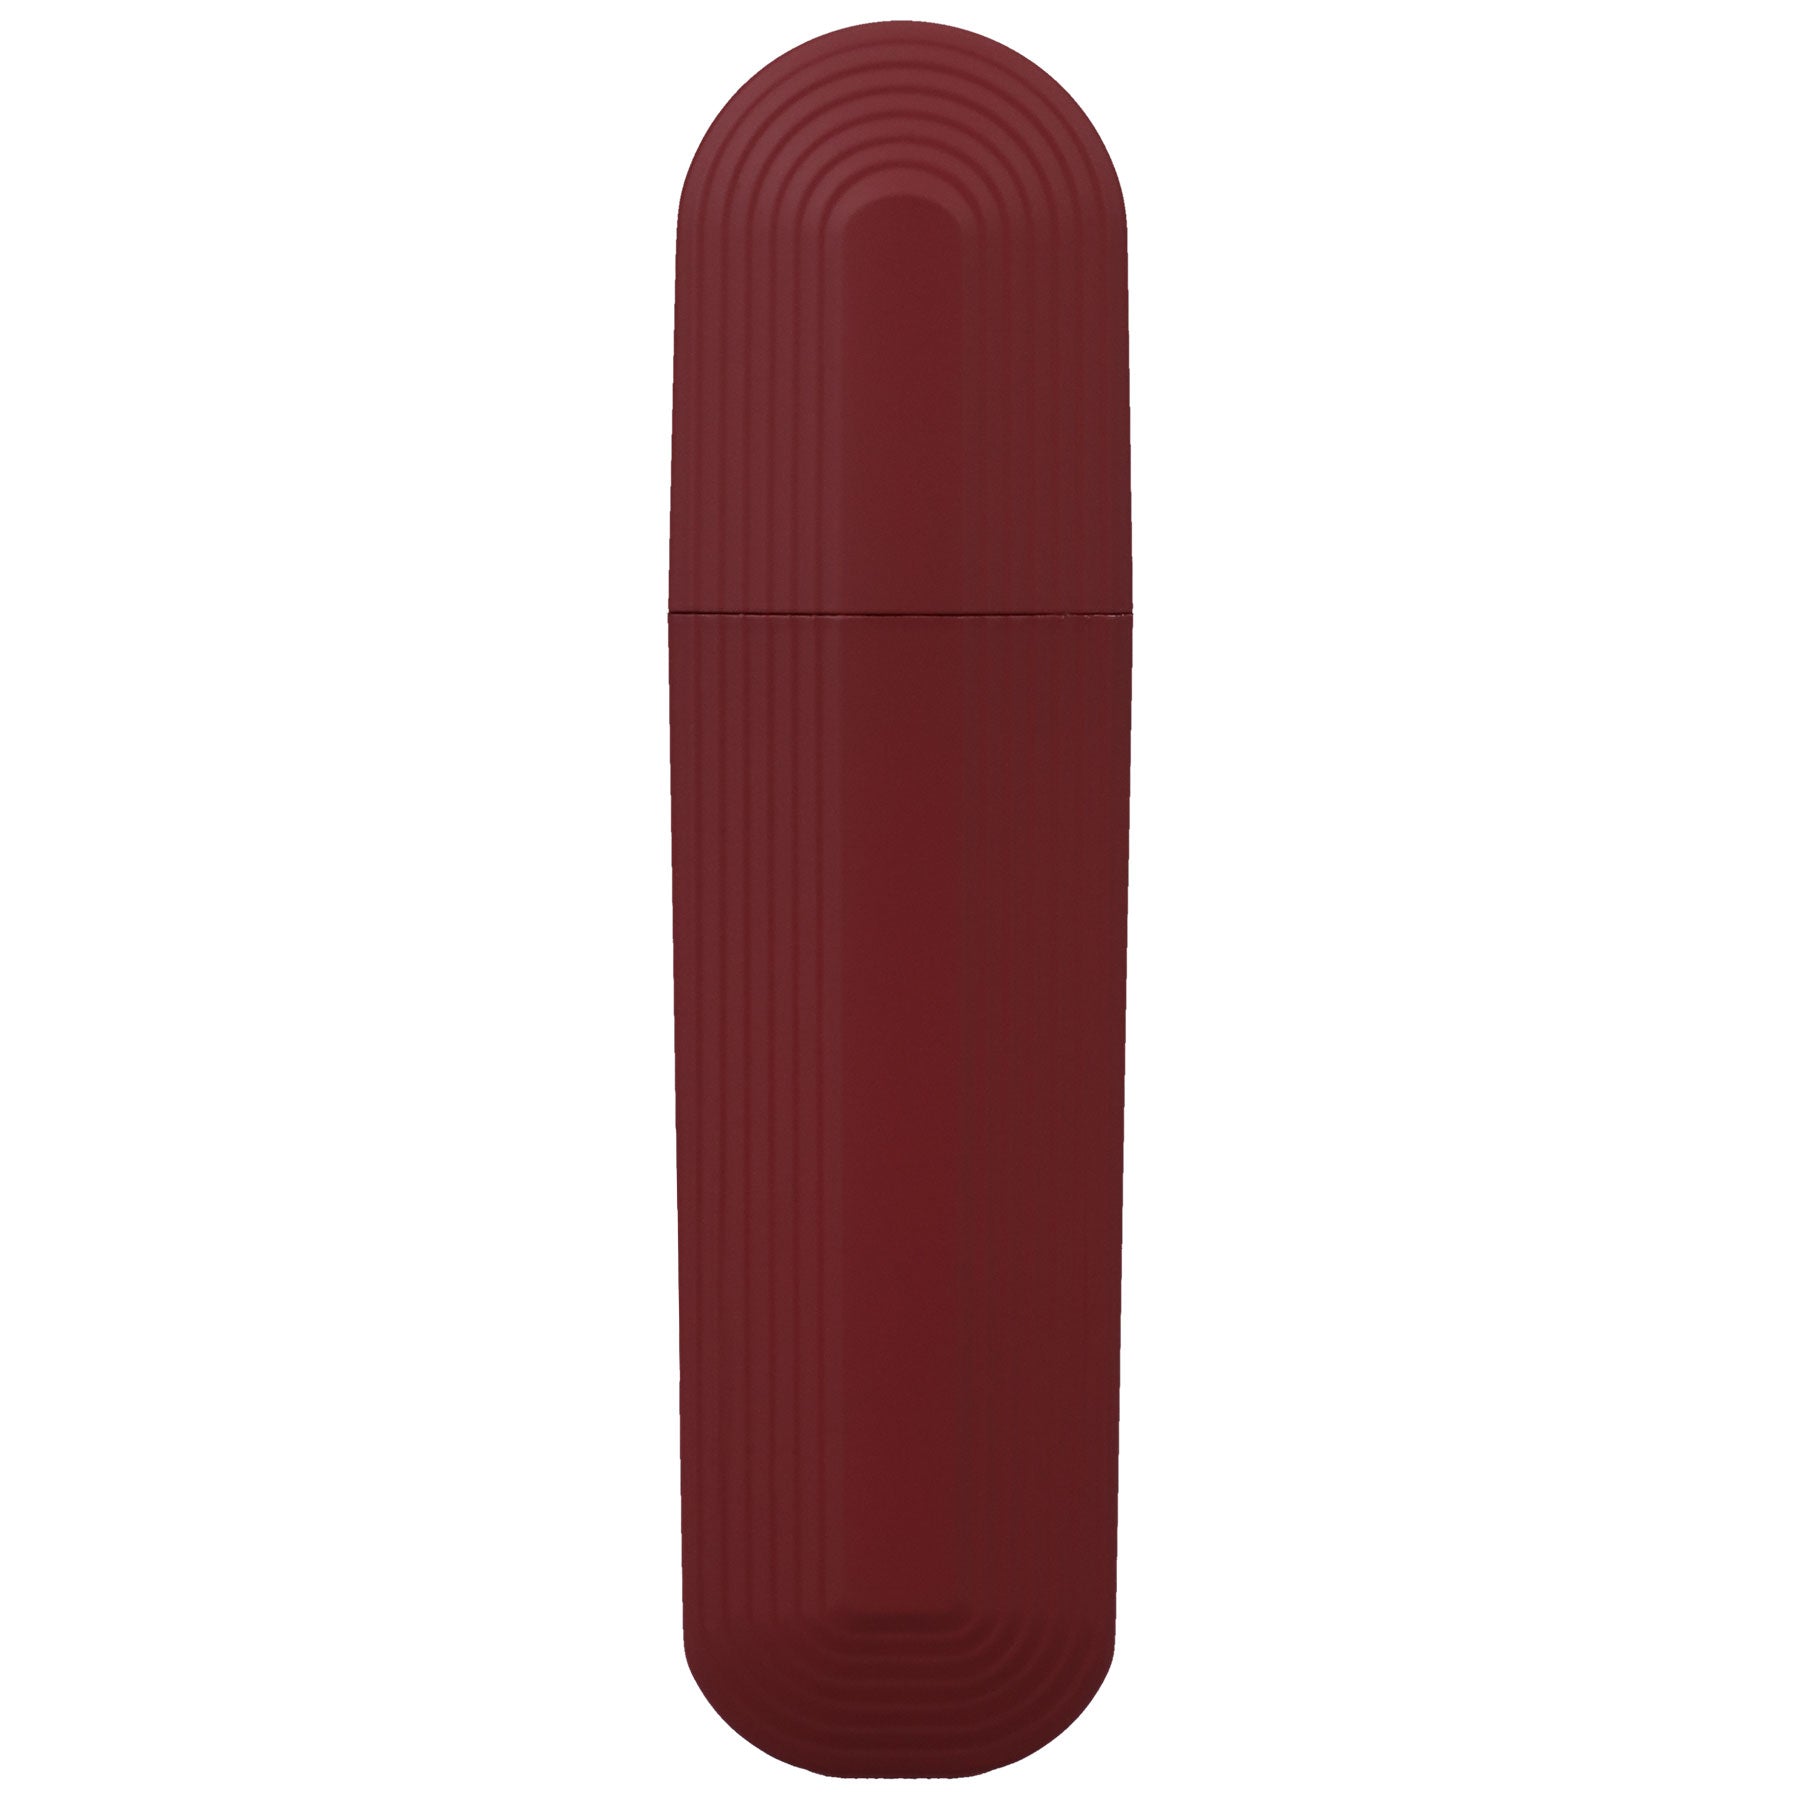 This Product Sucks - Sucking Clitoral Stimulator - Rechargeable - Red-6